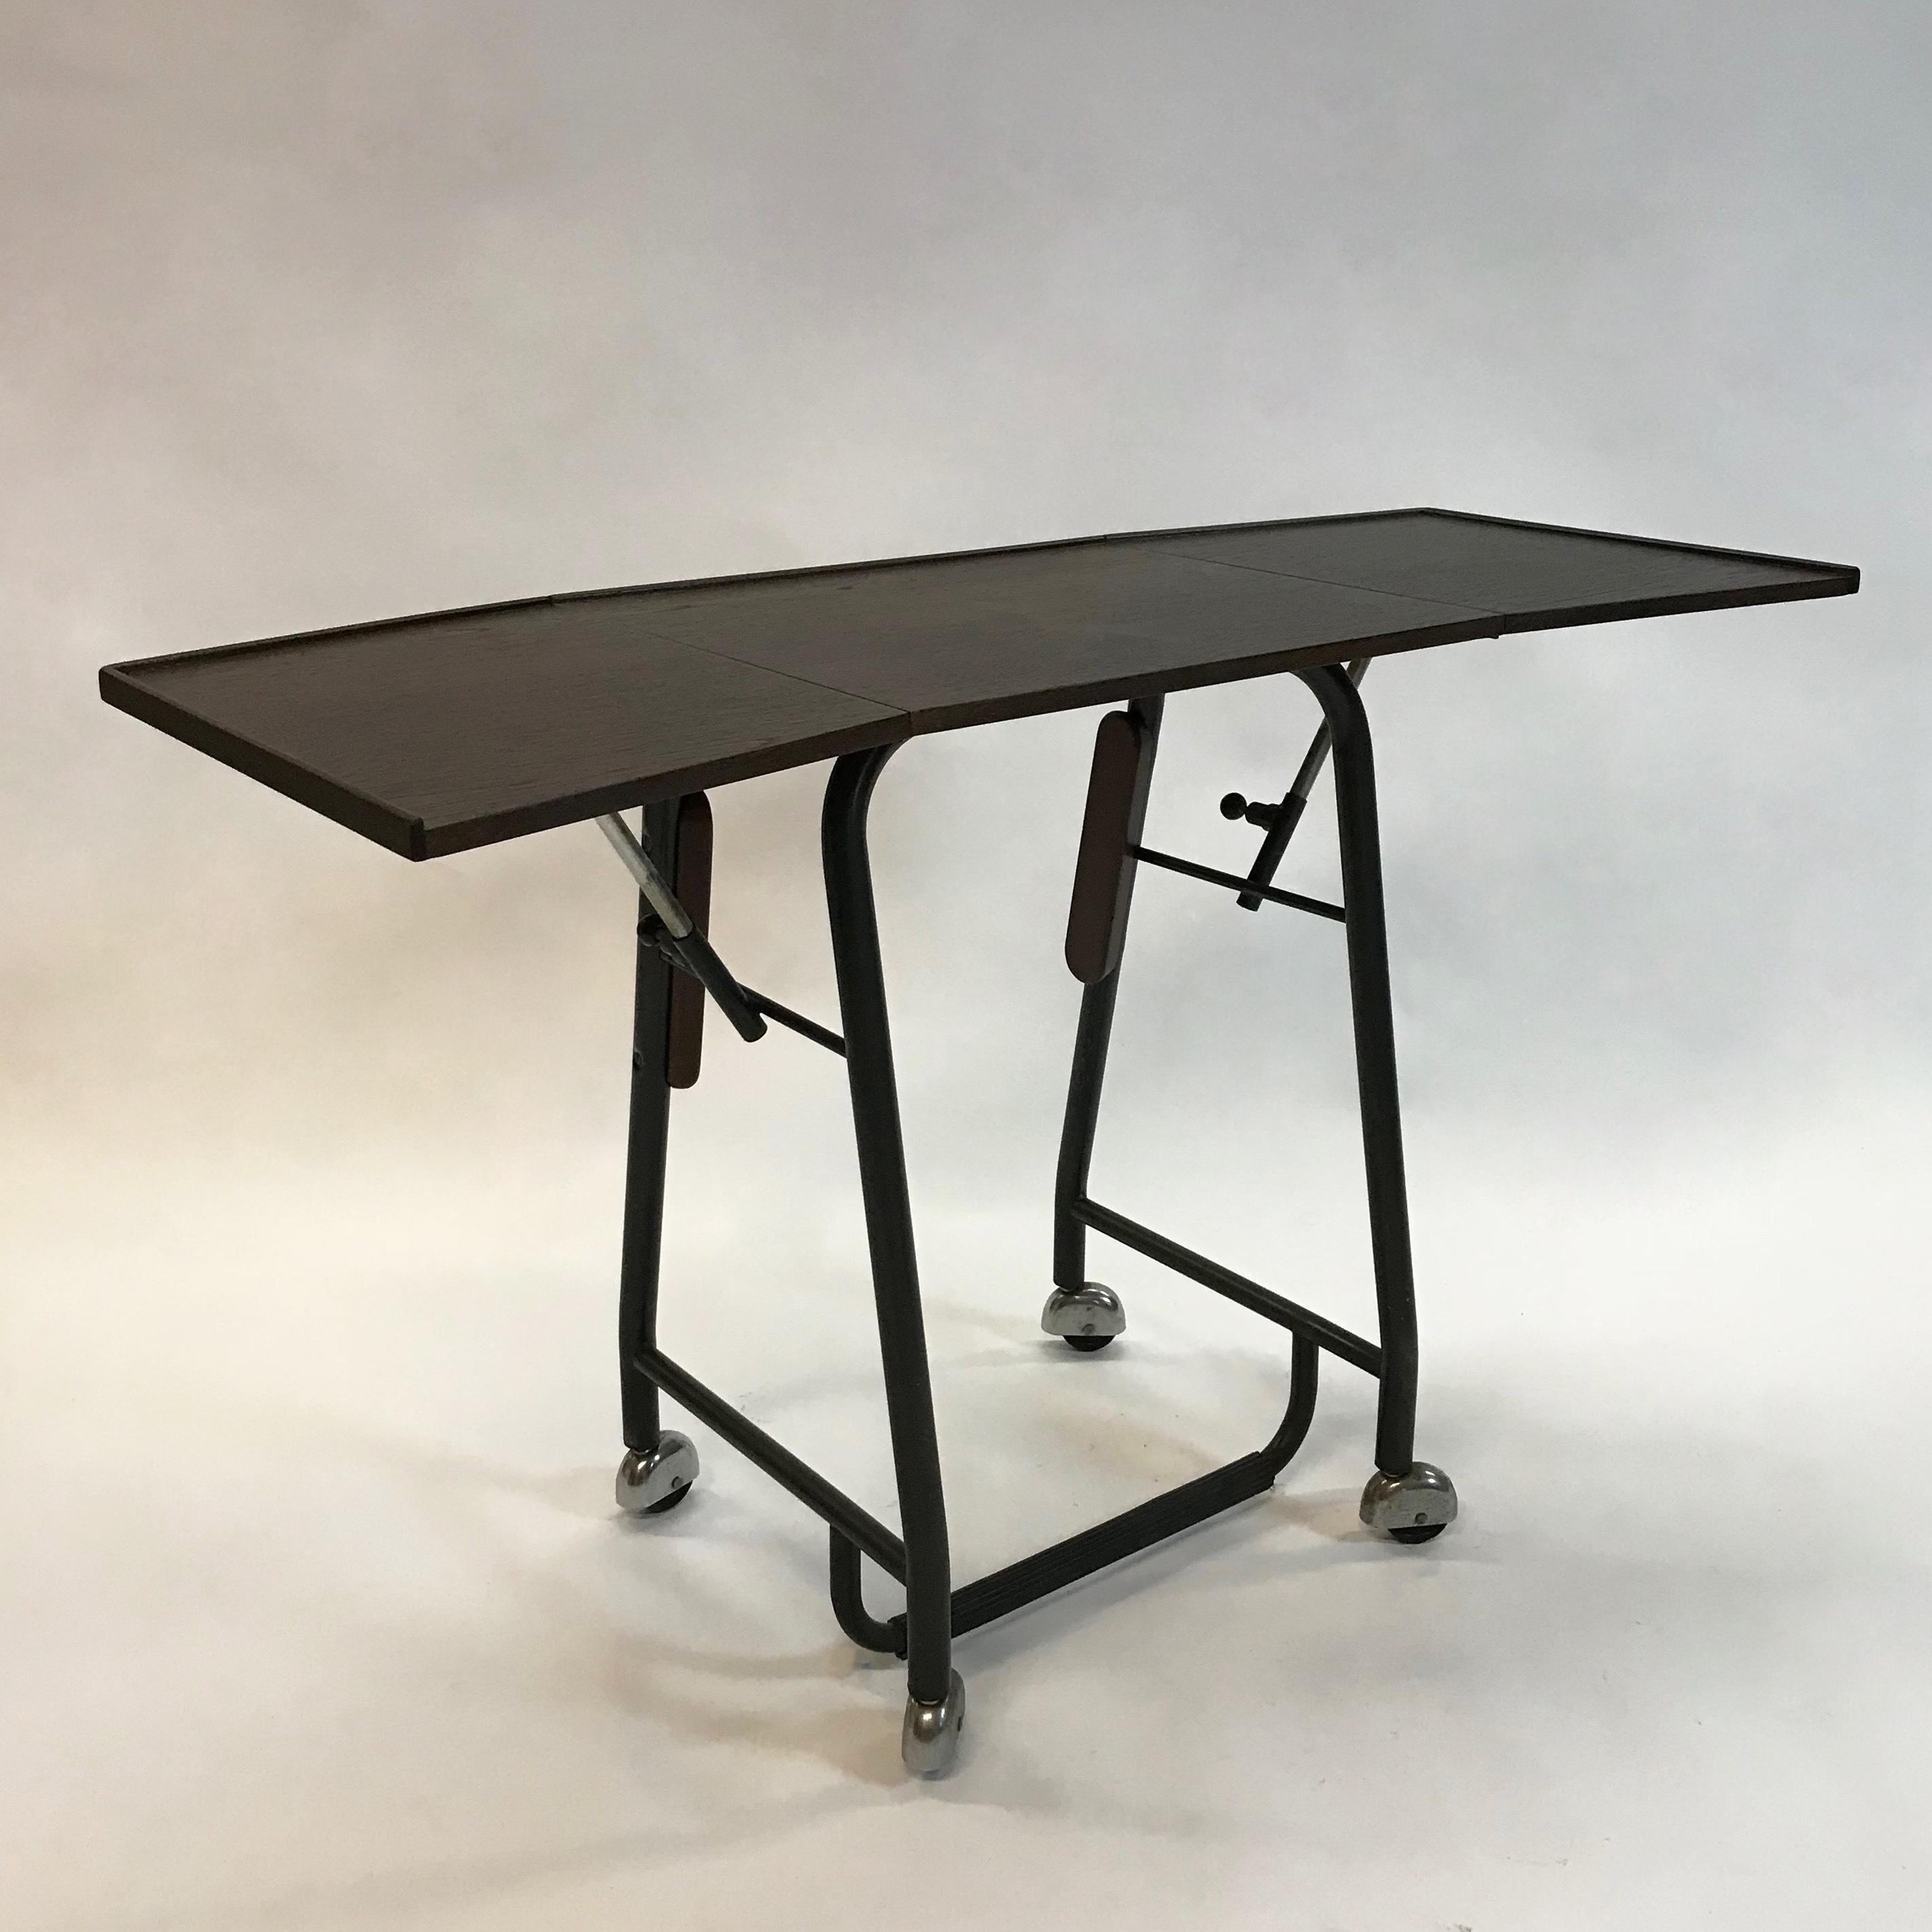 Rare, Mid-Century Modern, rolling typewriter table by Jorgen Rasmussen for Knoll features a gate-fold, teak top with a lip for paper, metal base with rubber coated footrest. When folded it measures 18.5 inches wide. One sits at the table with the